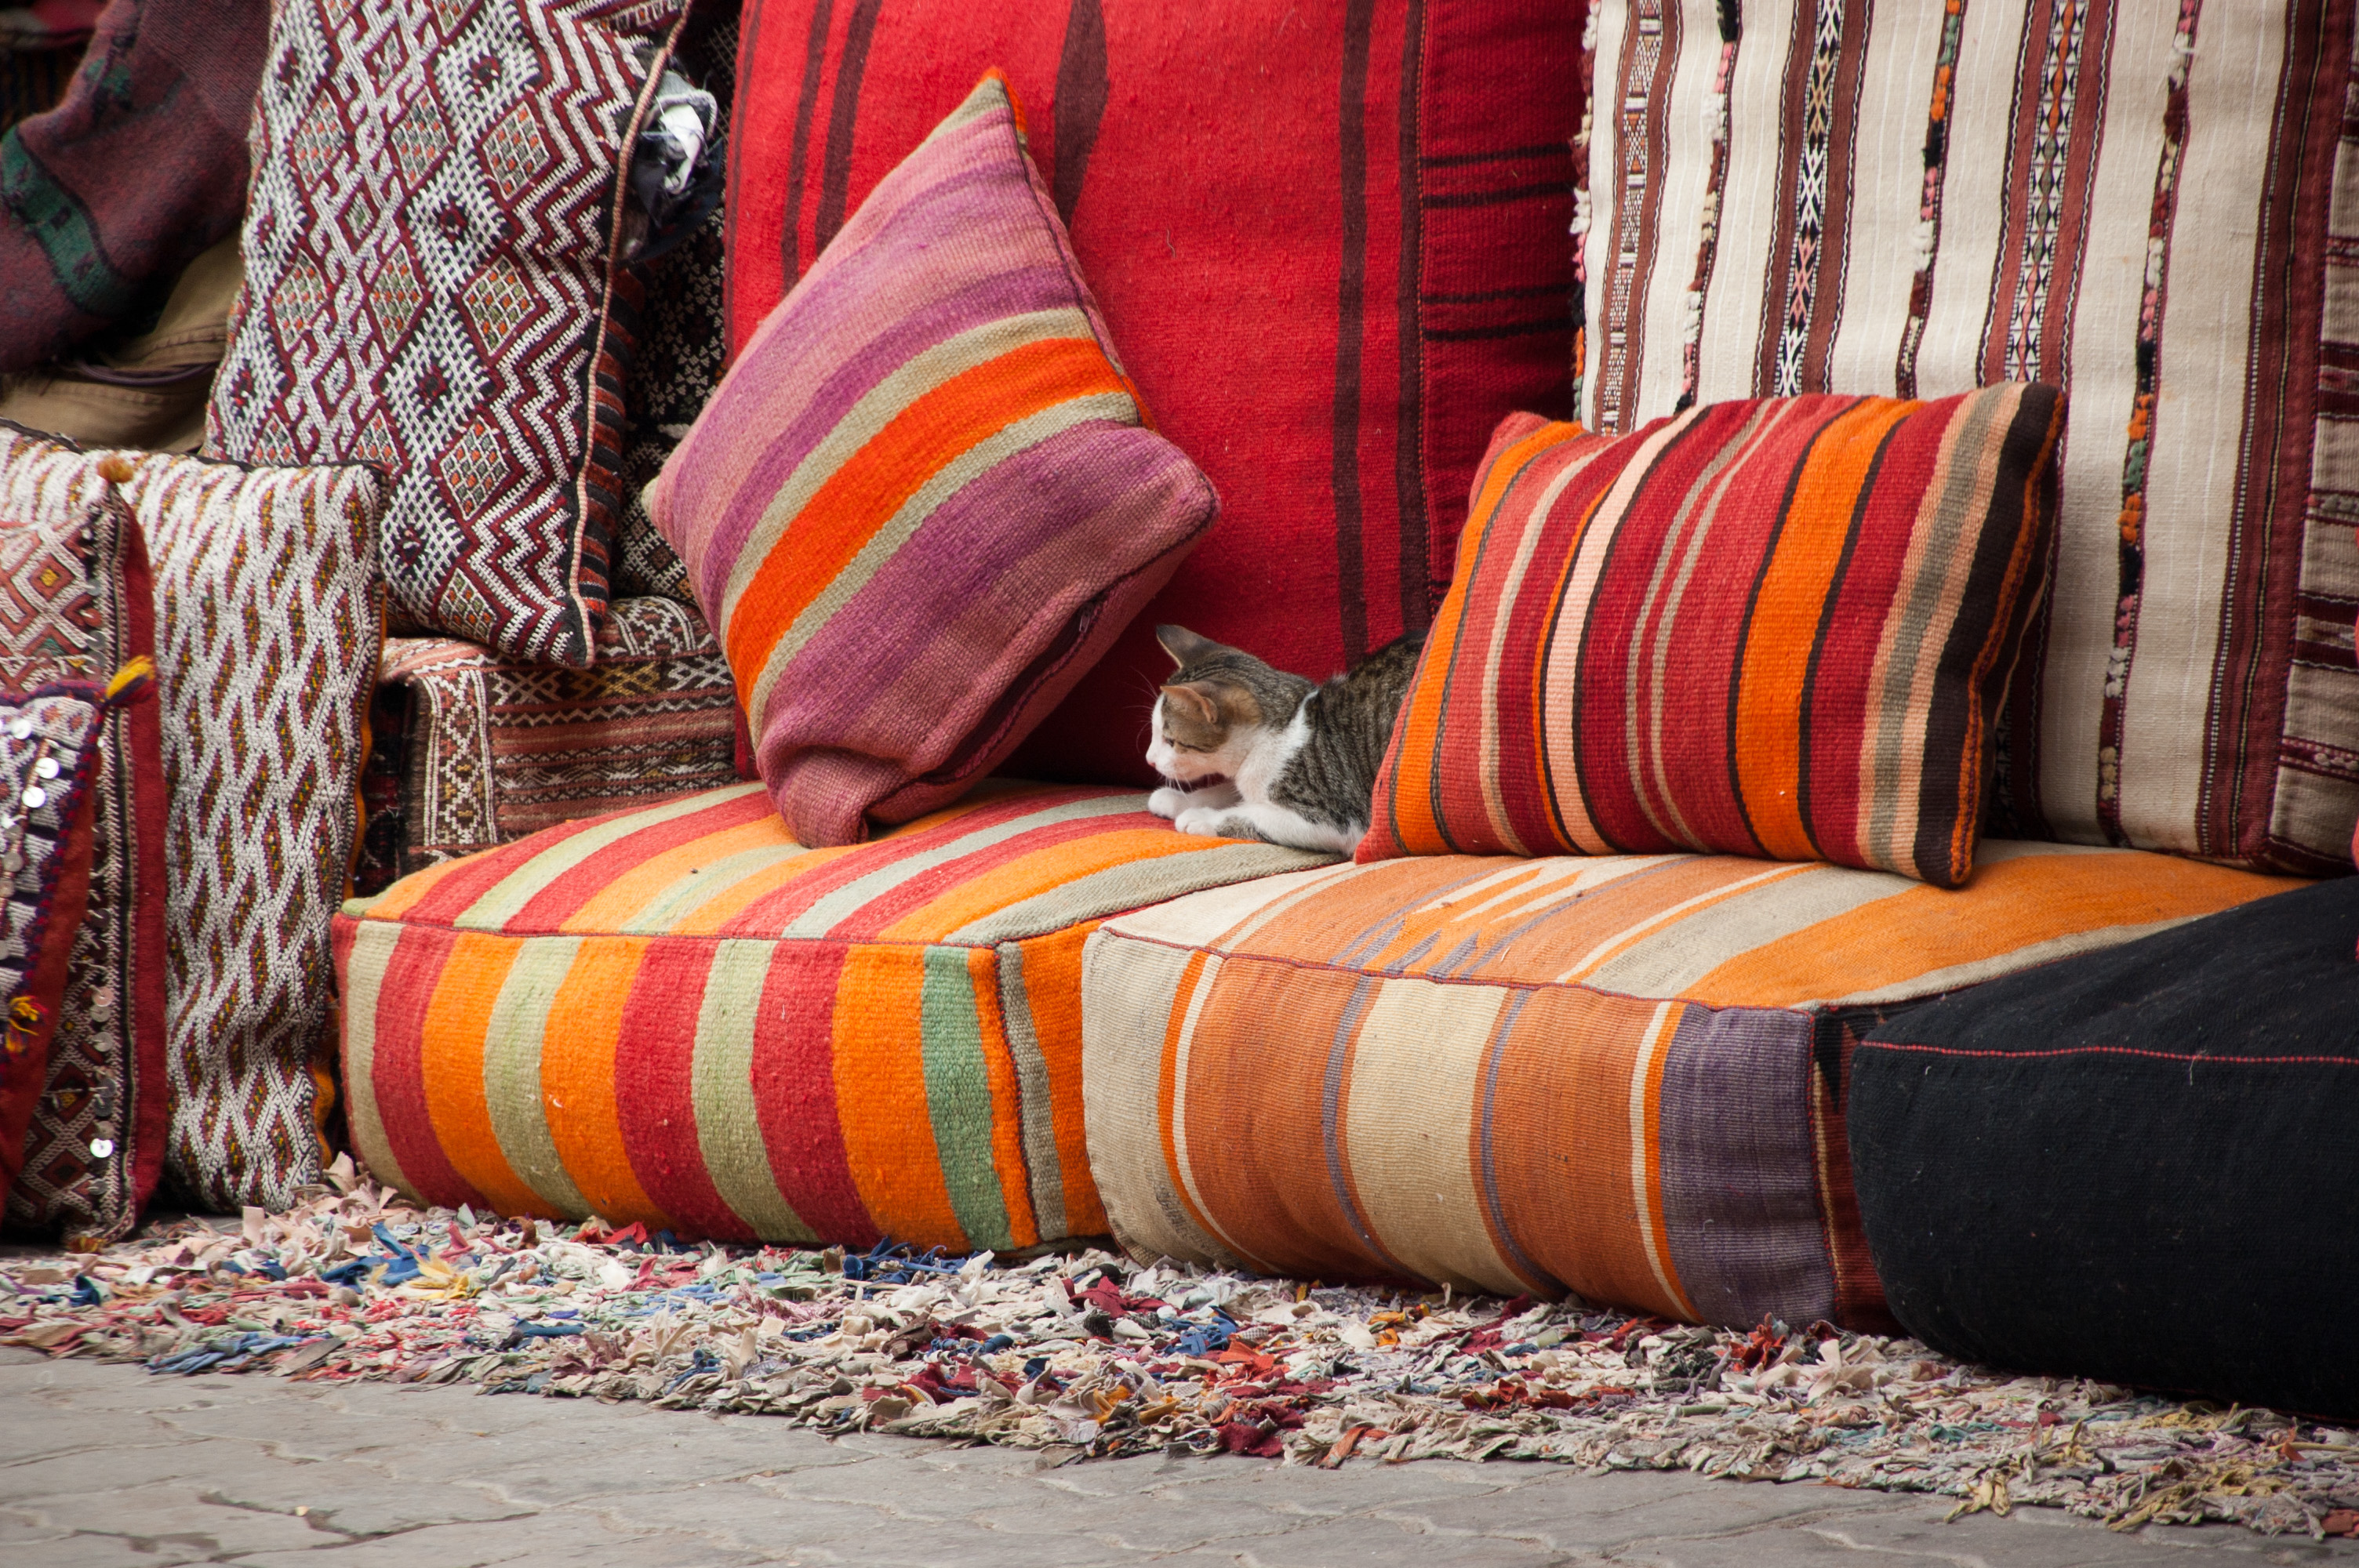 Seat cushions in colourful prints and patterns